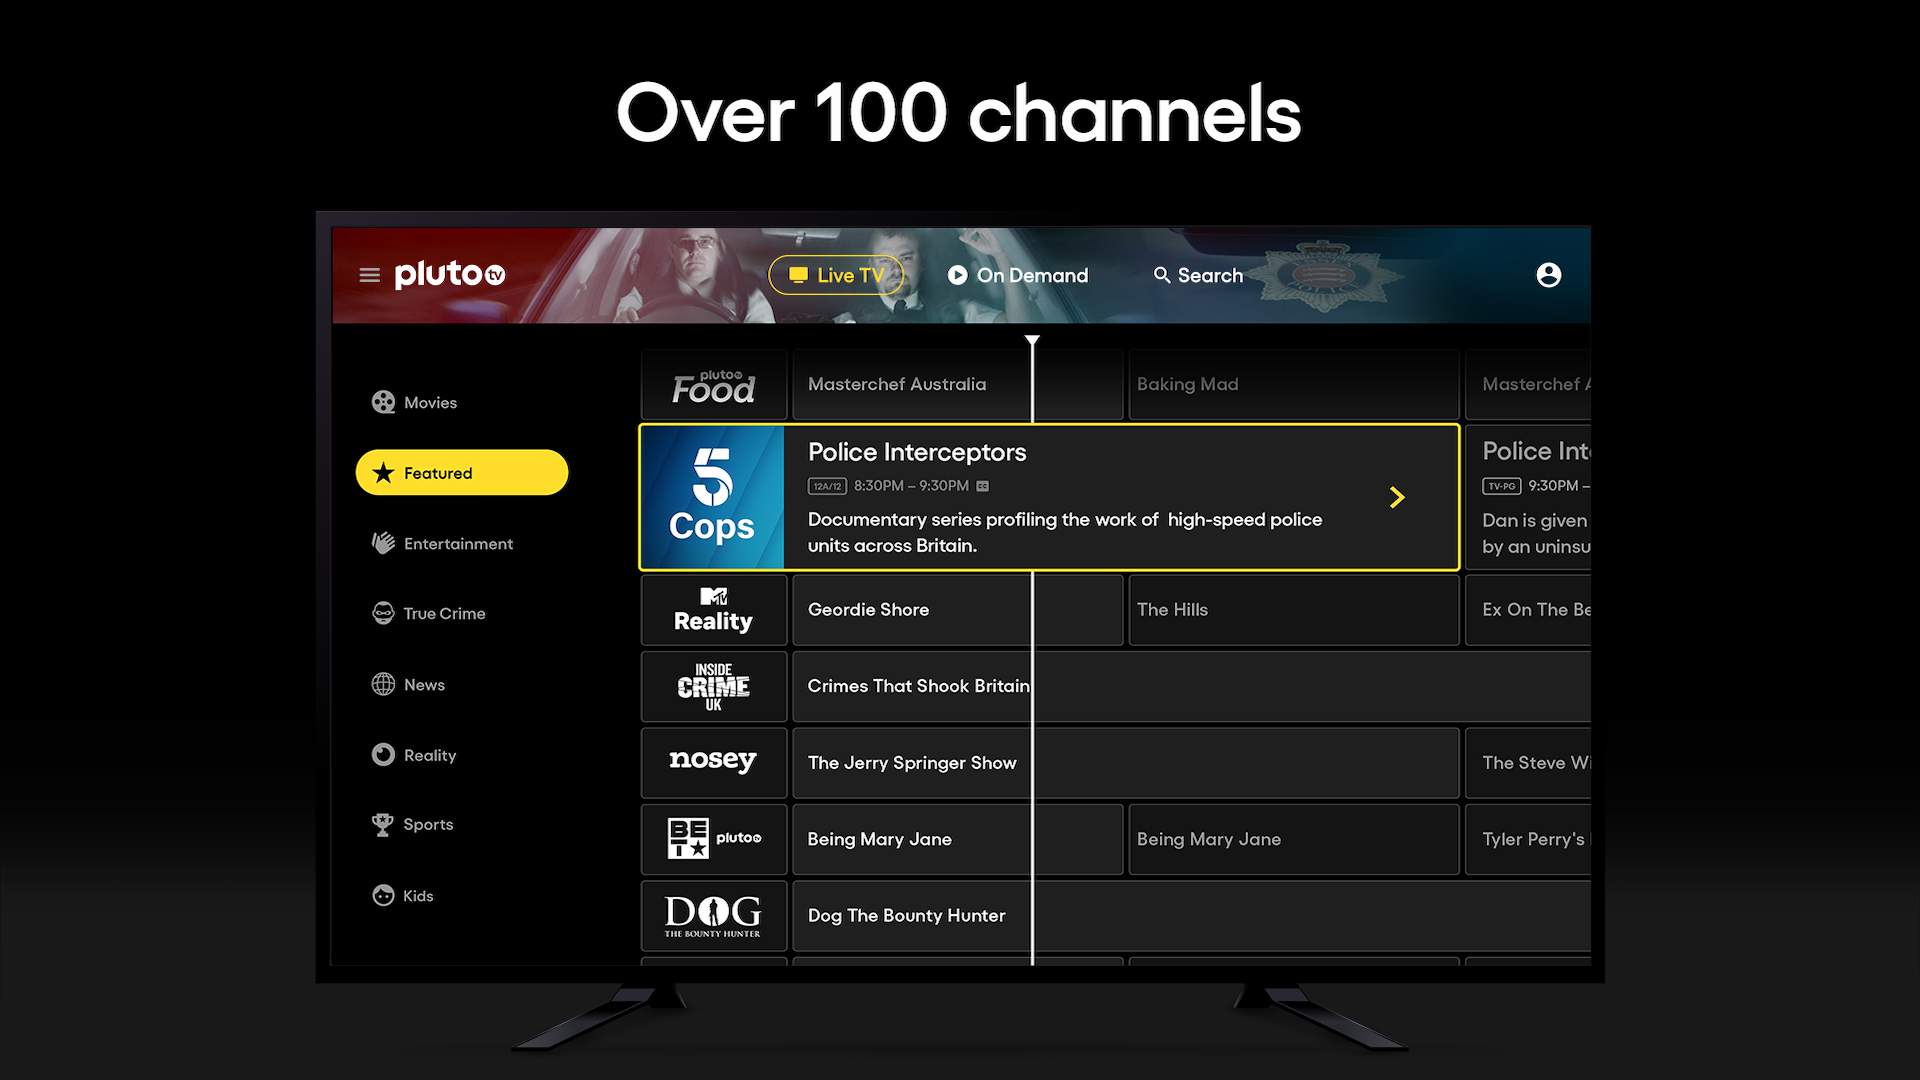 Pluto TV interface and channel selection menu